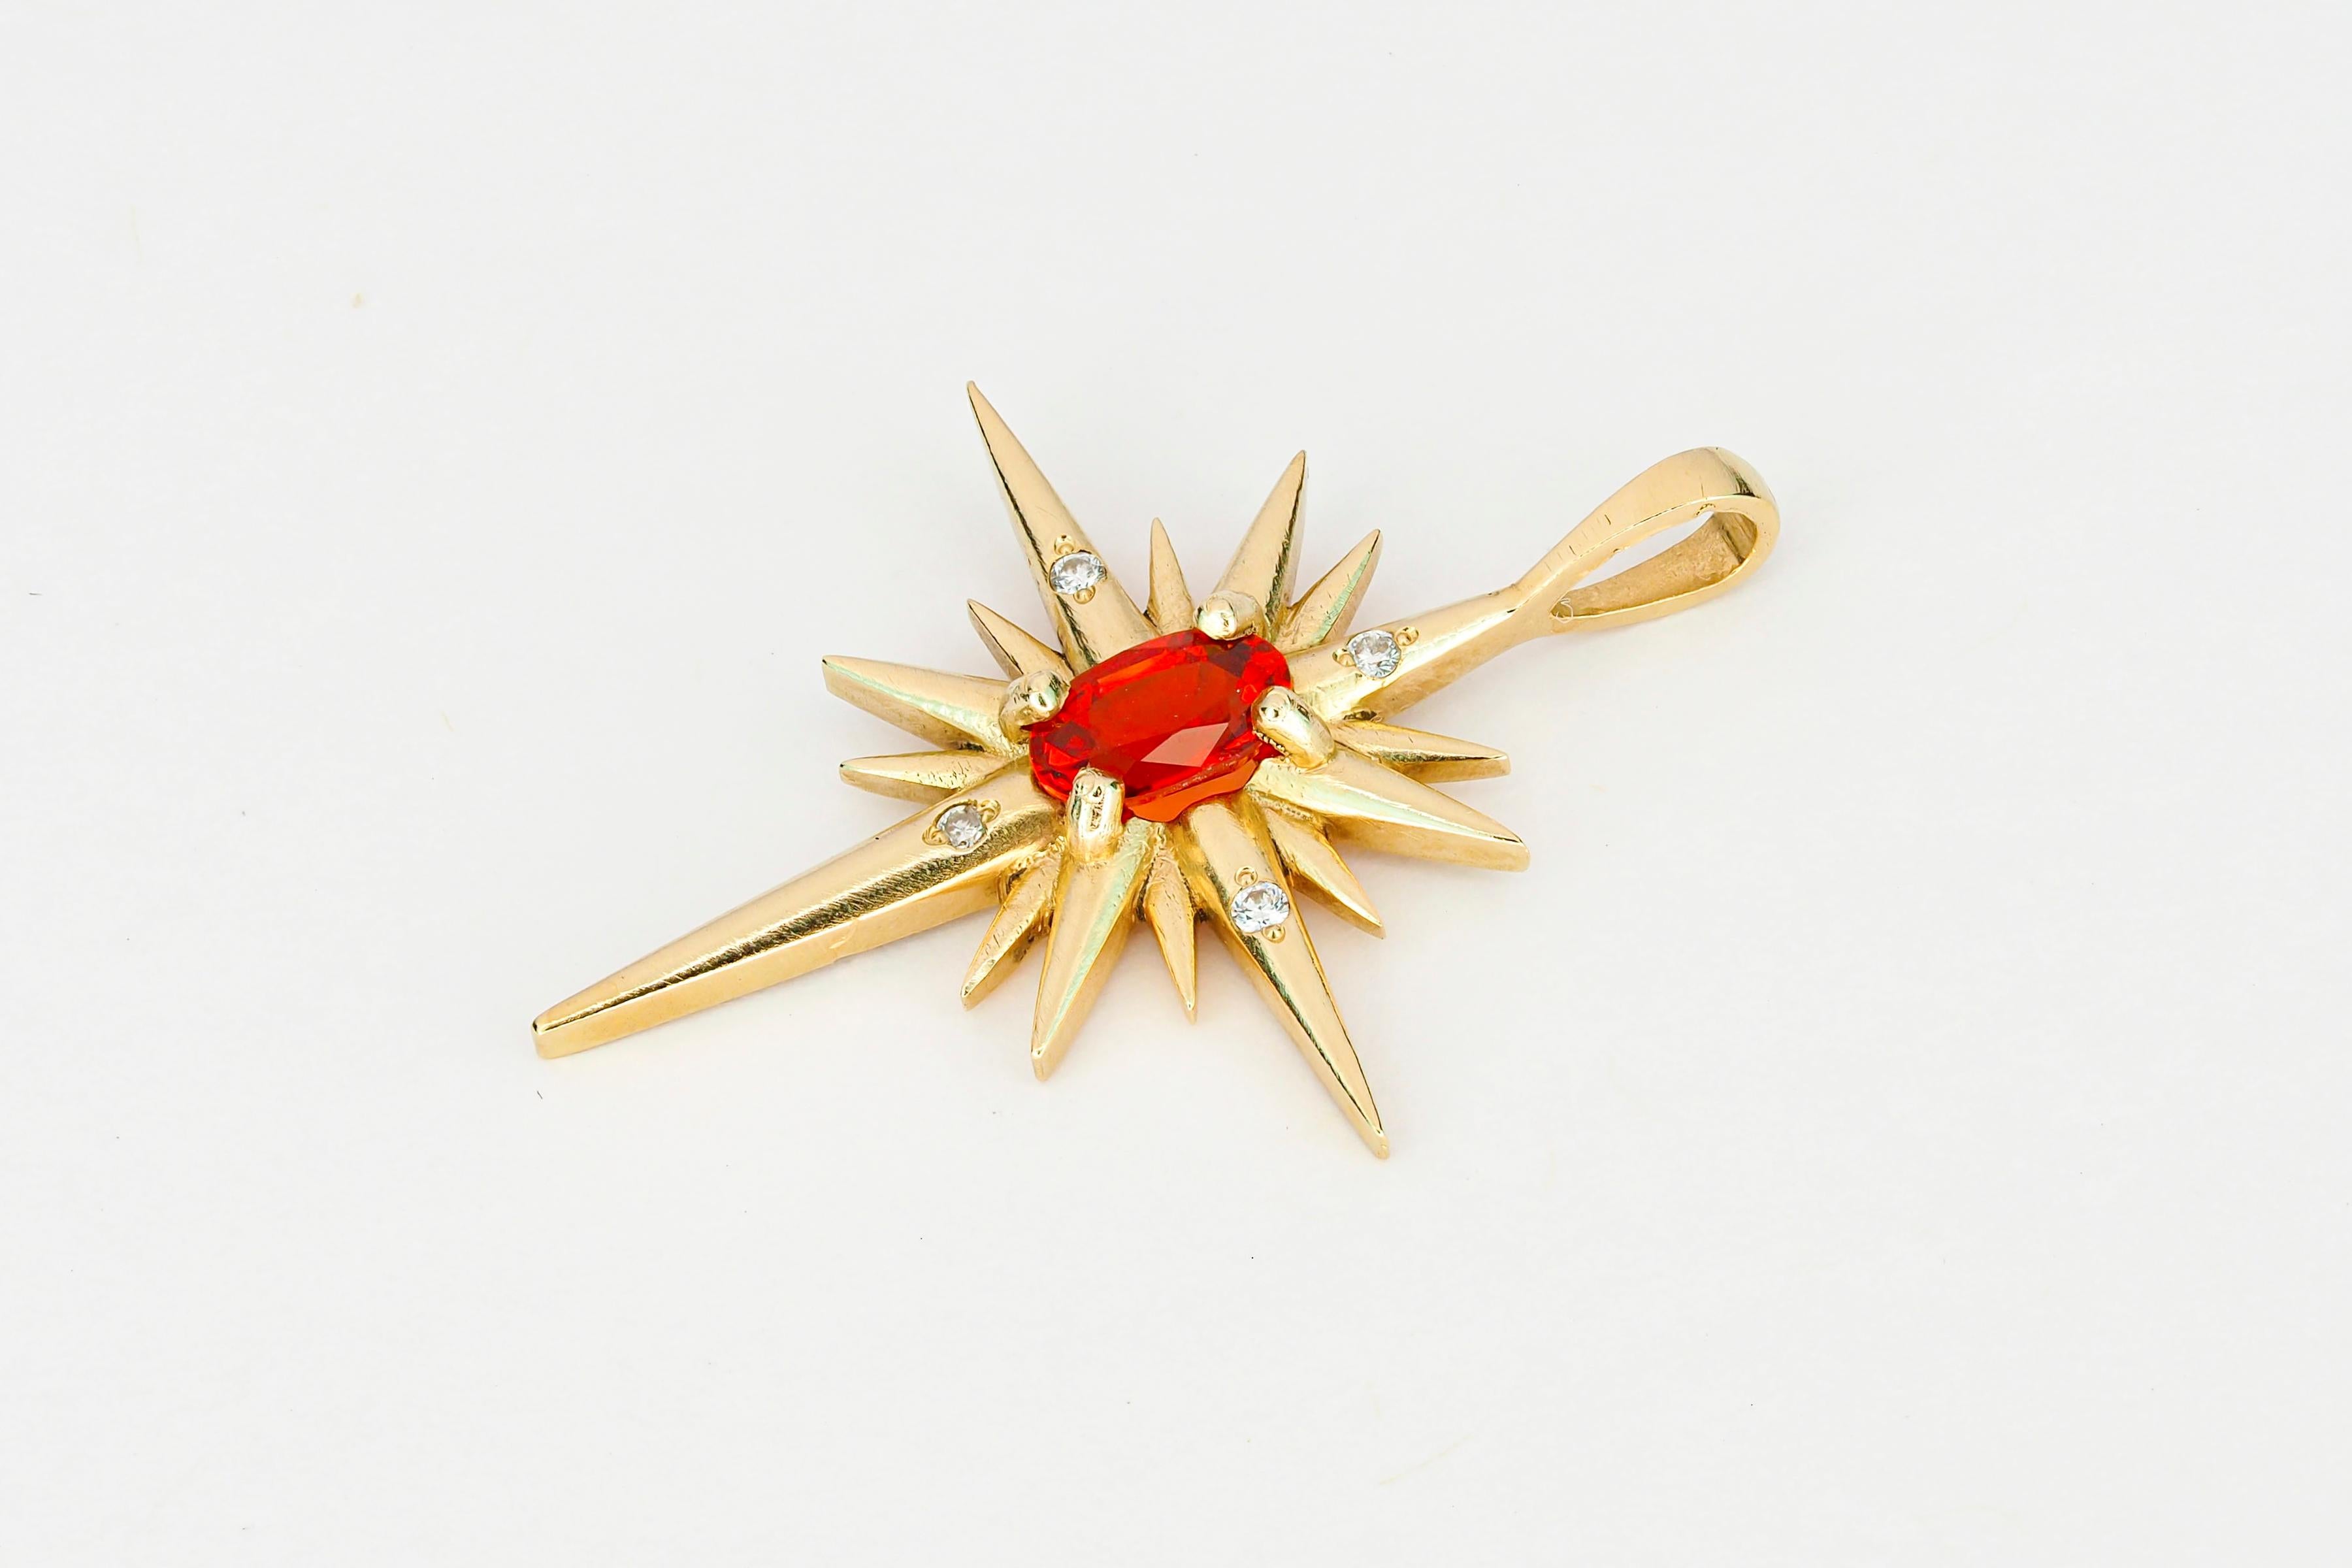 14 kt solid gold Star pendant with orange-red natural sapphire and diamonds. September birthstone.
Size: 25.5 x 18.5 mm.
Total weight: 1.60 g.

Gemstones:
Natural sapphires: oval shape, orange red color, transparent with inclusions, 0.45